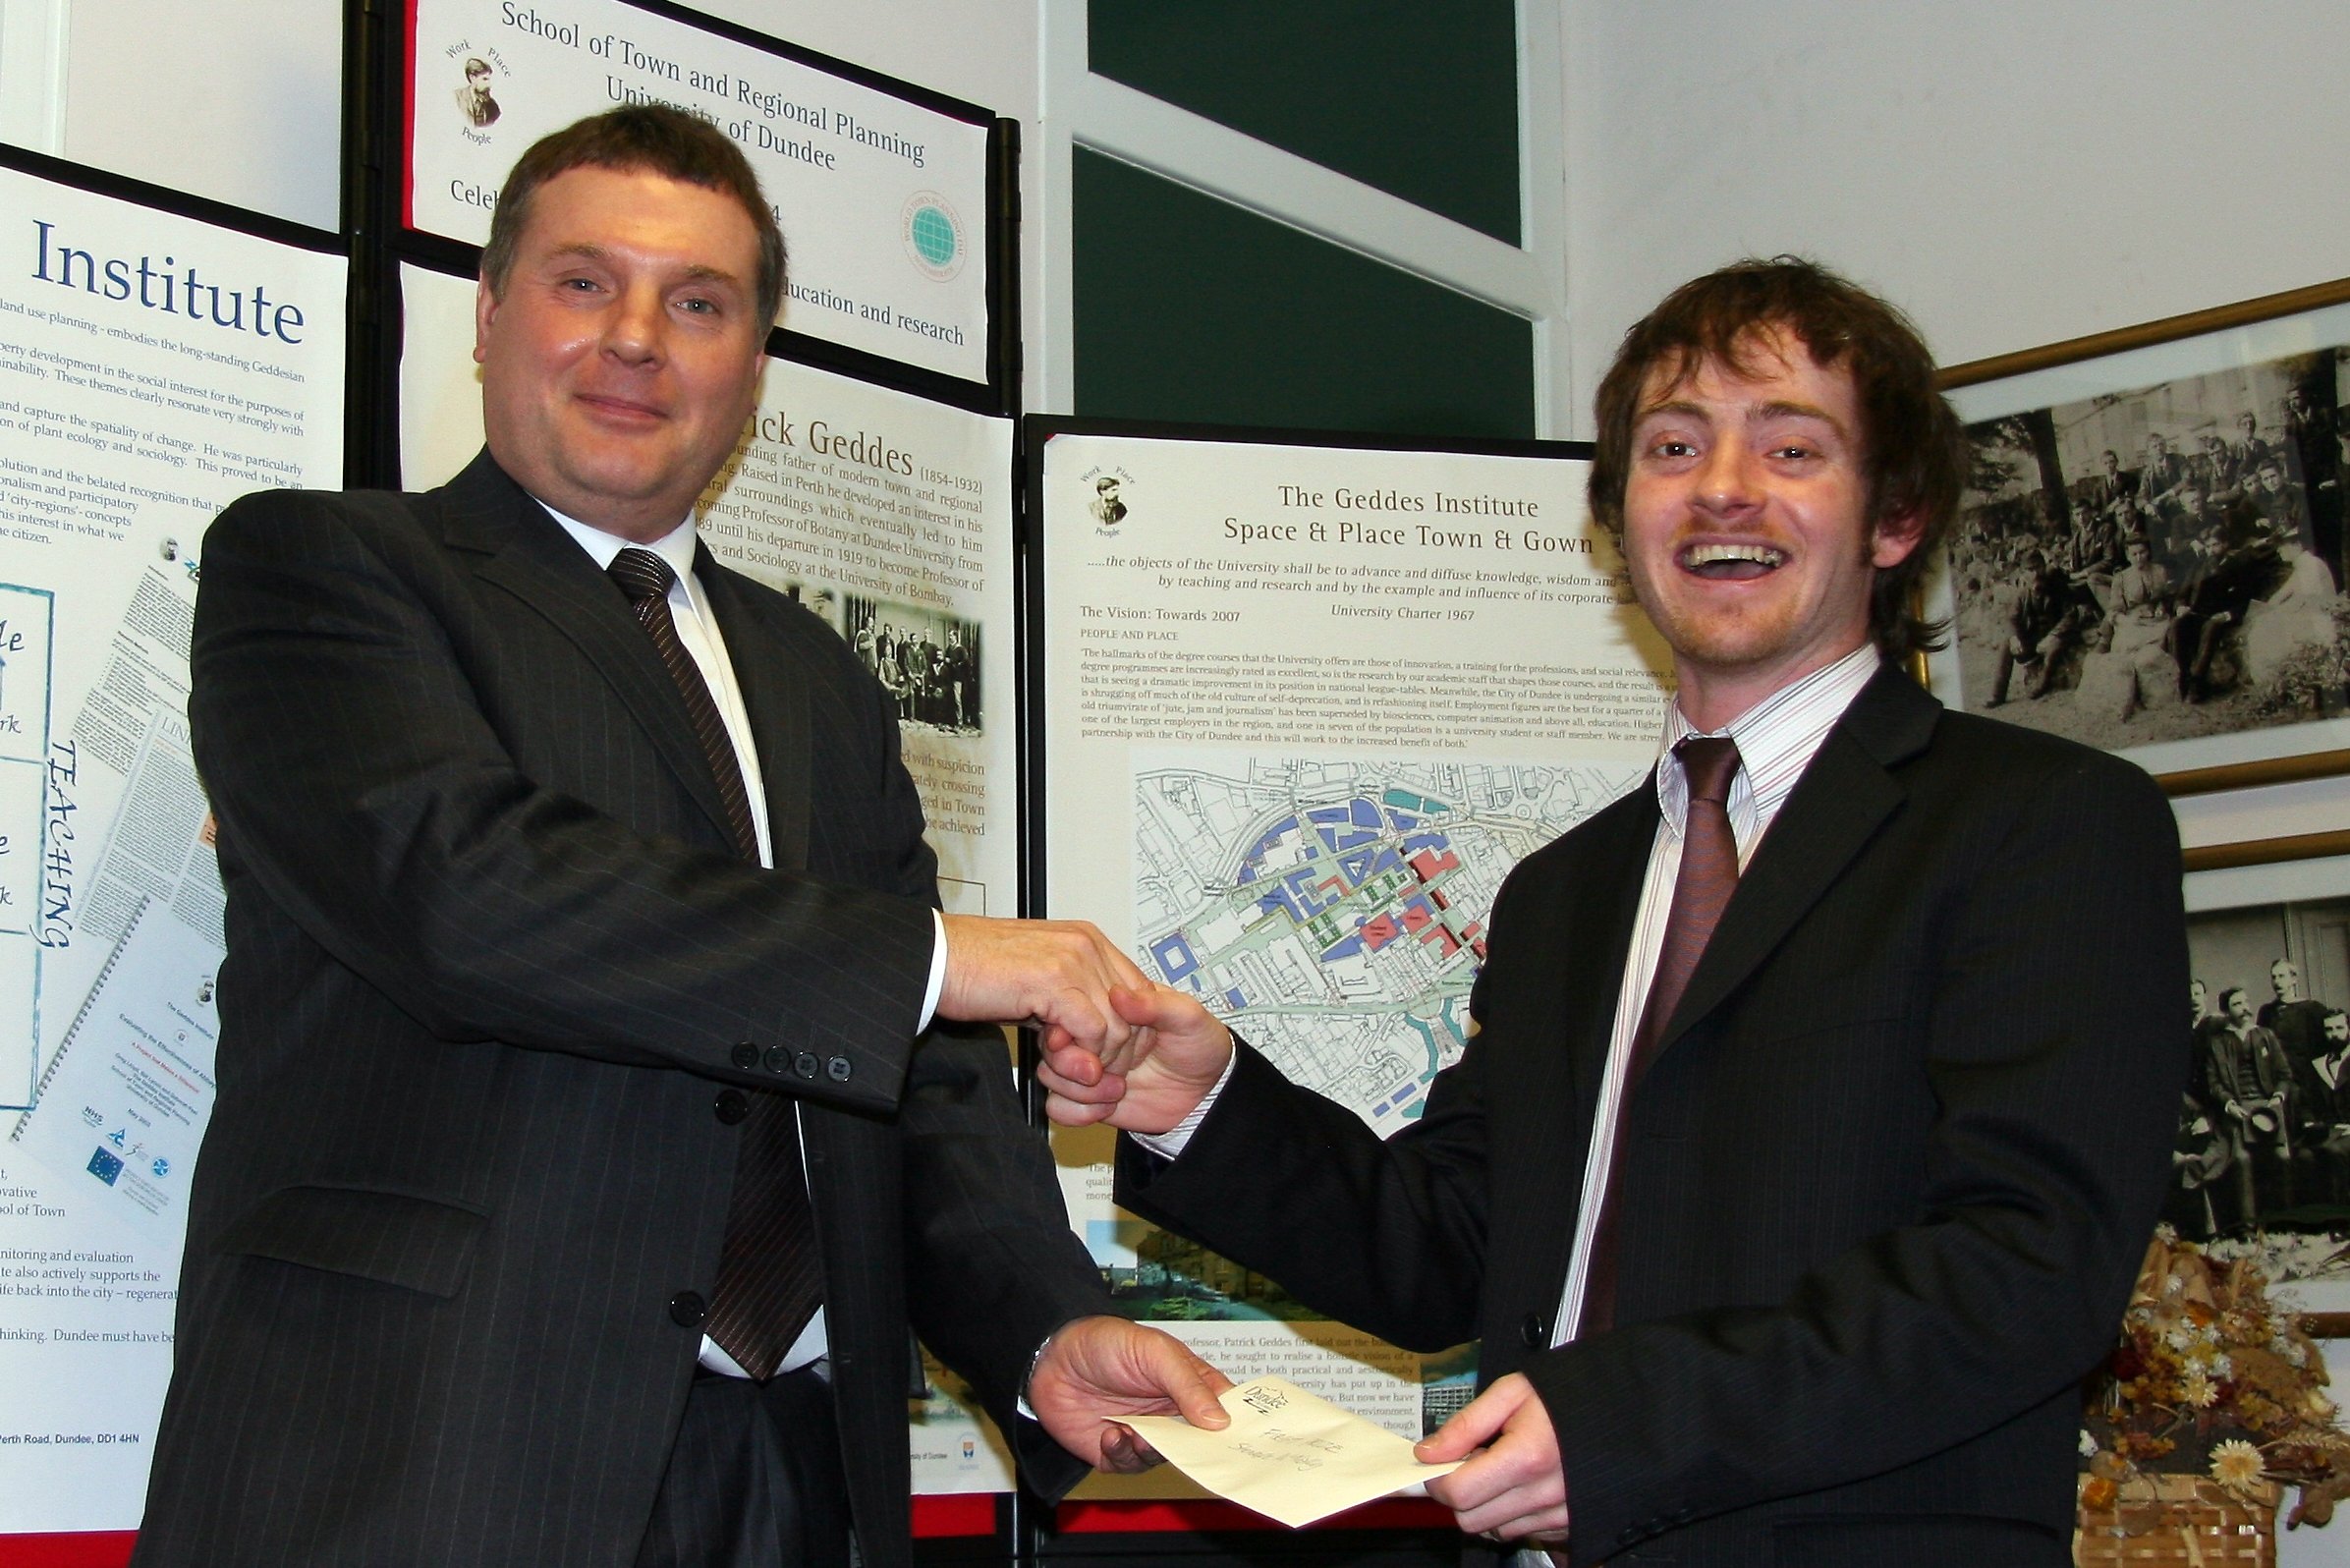 a photo of the winner of the civic award